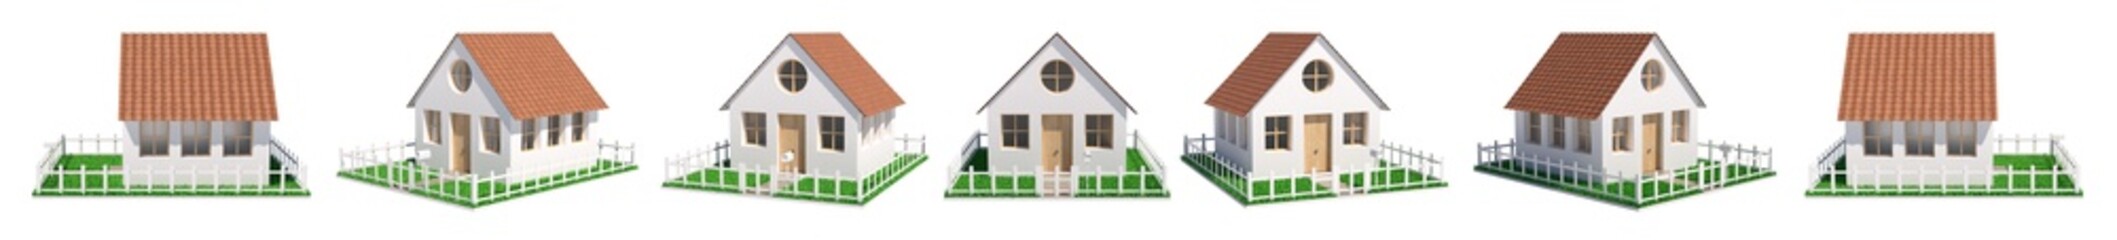 3D illustration of an adorable house from various perspectives. 